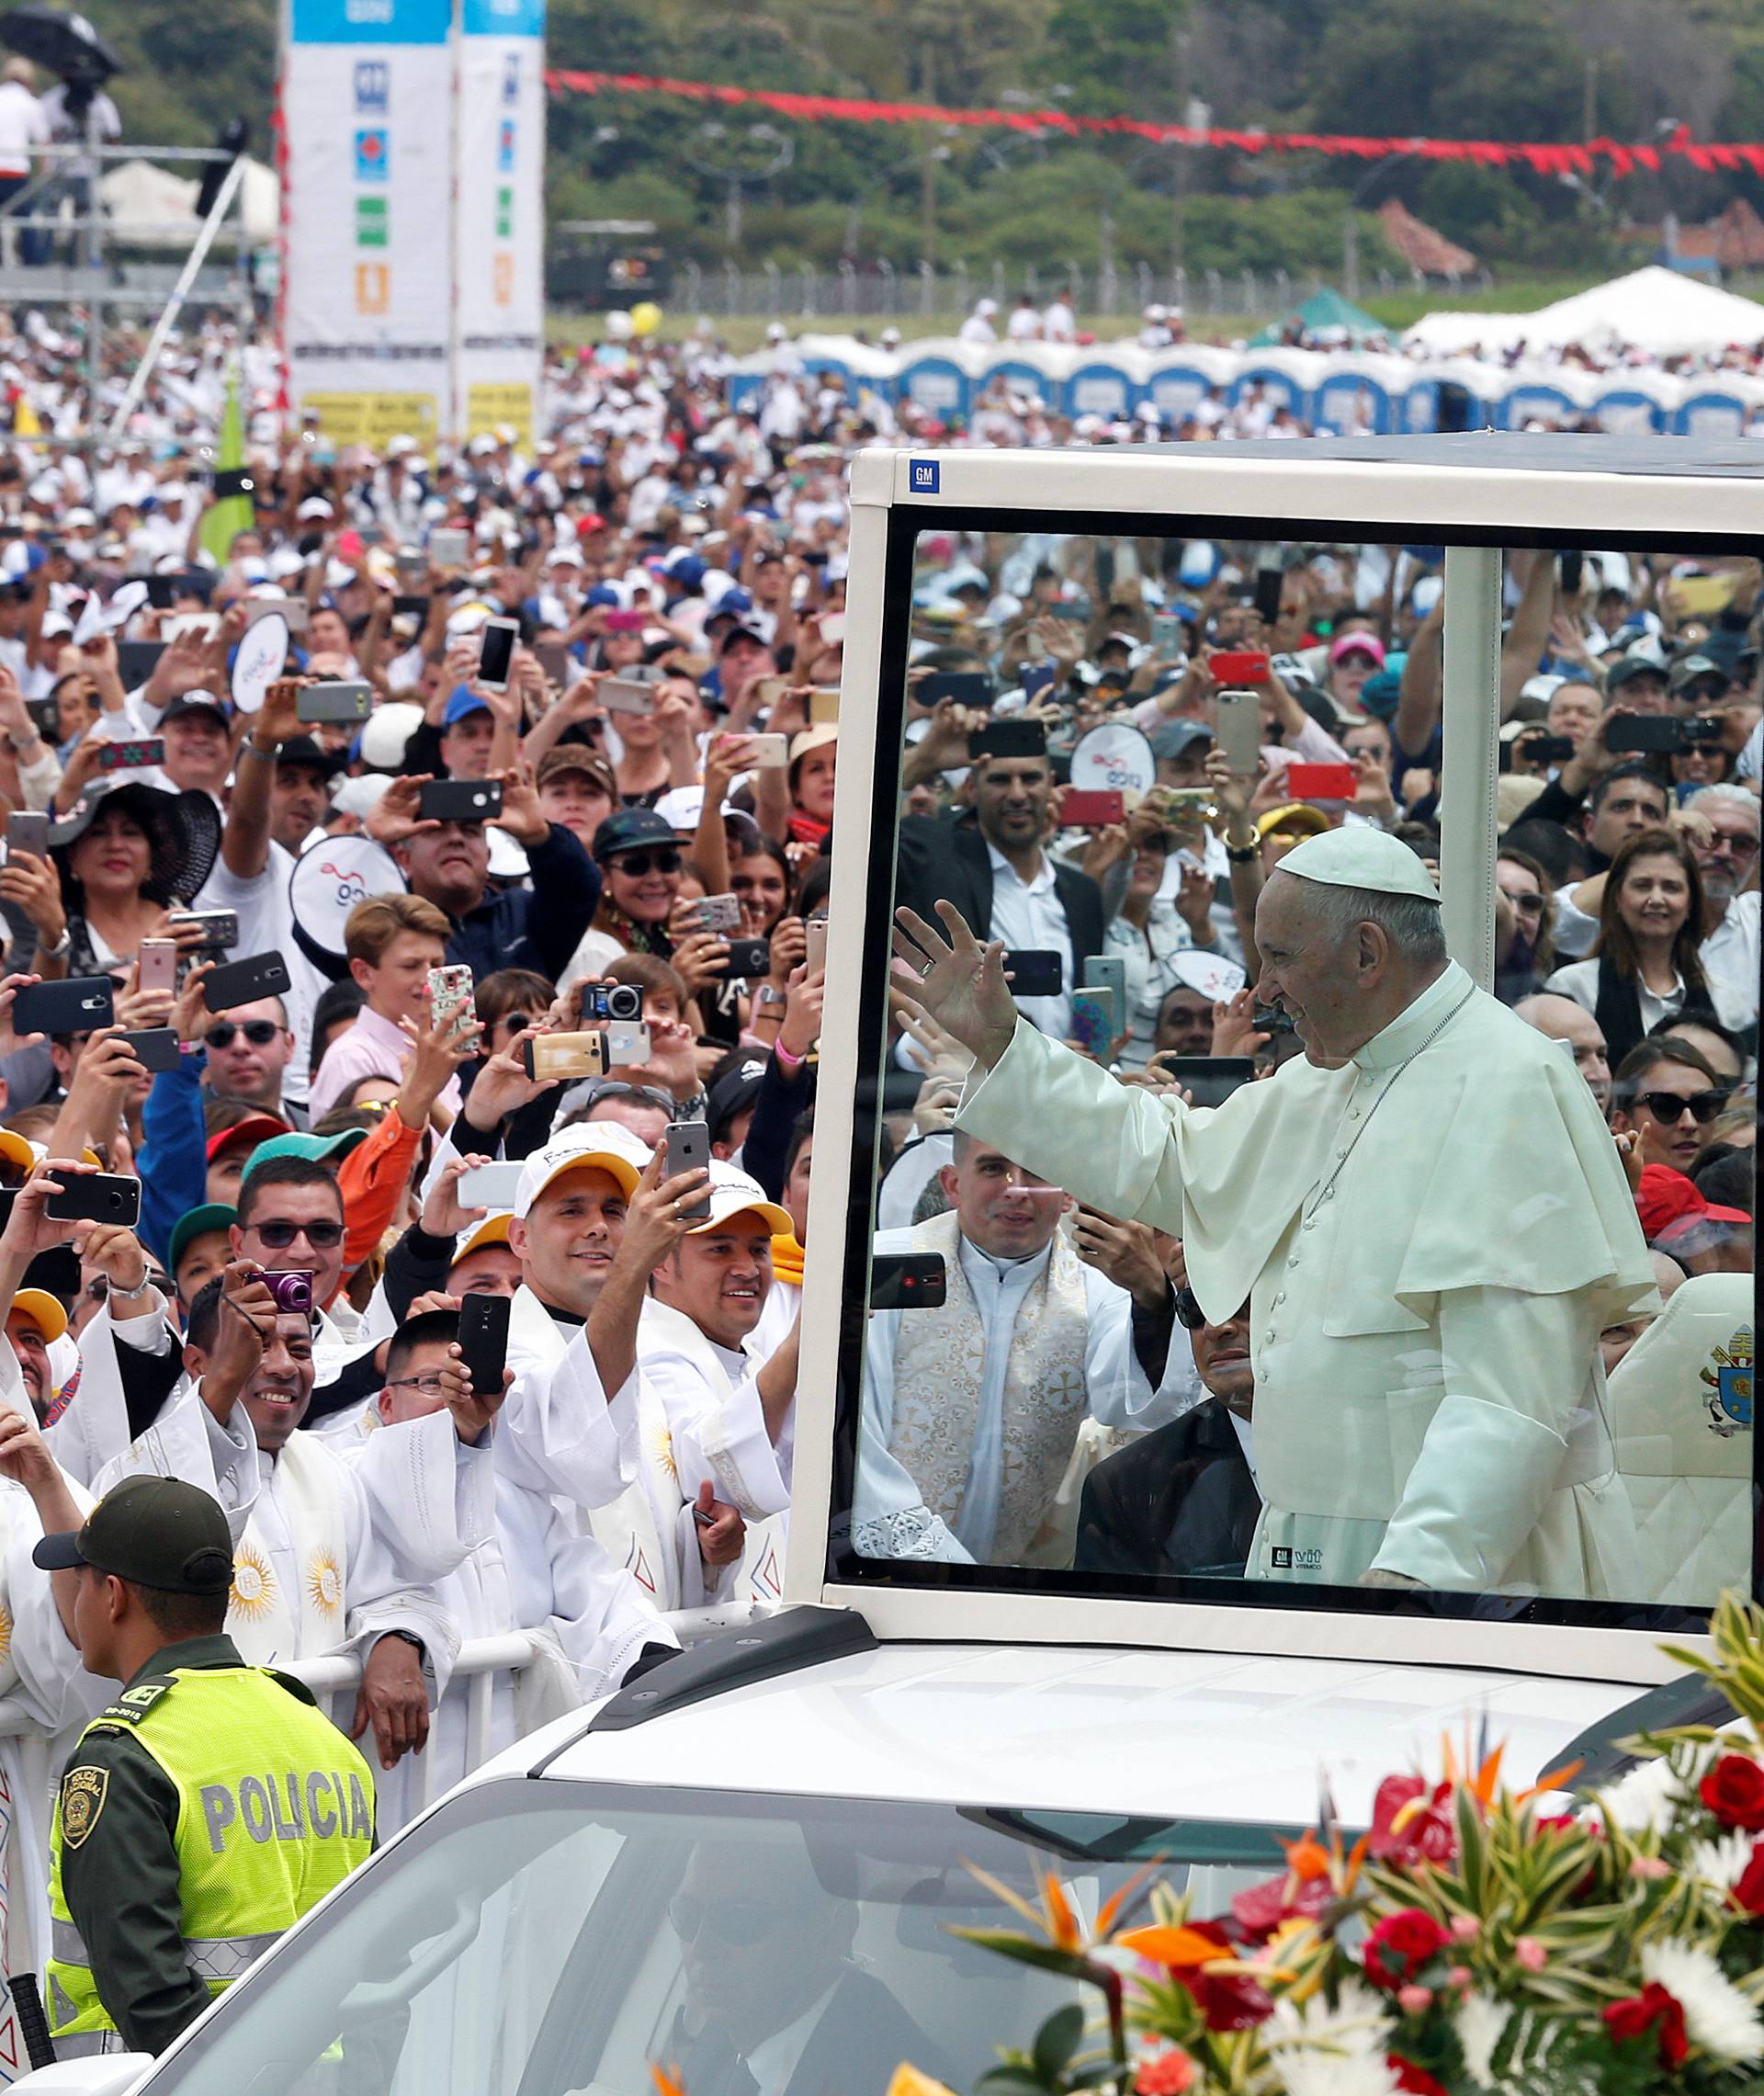 Pope Francis arrives on the popemobile for a holy mass at Enrique Olaya Herrera airport in Medellin